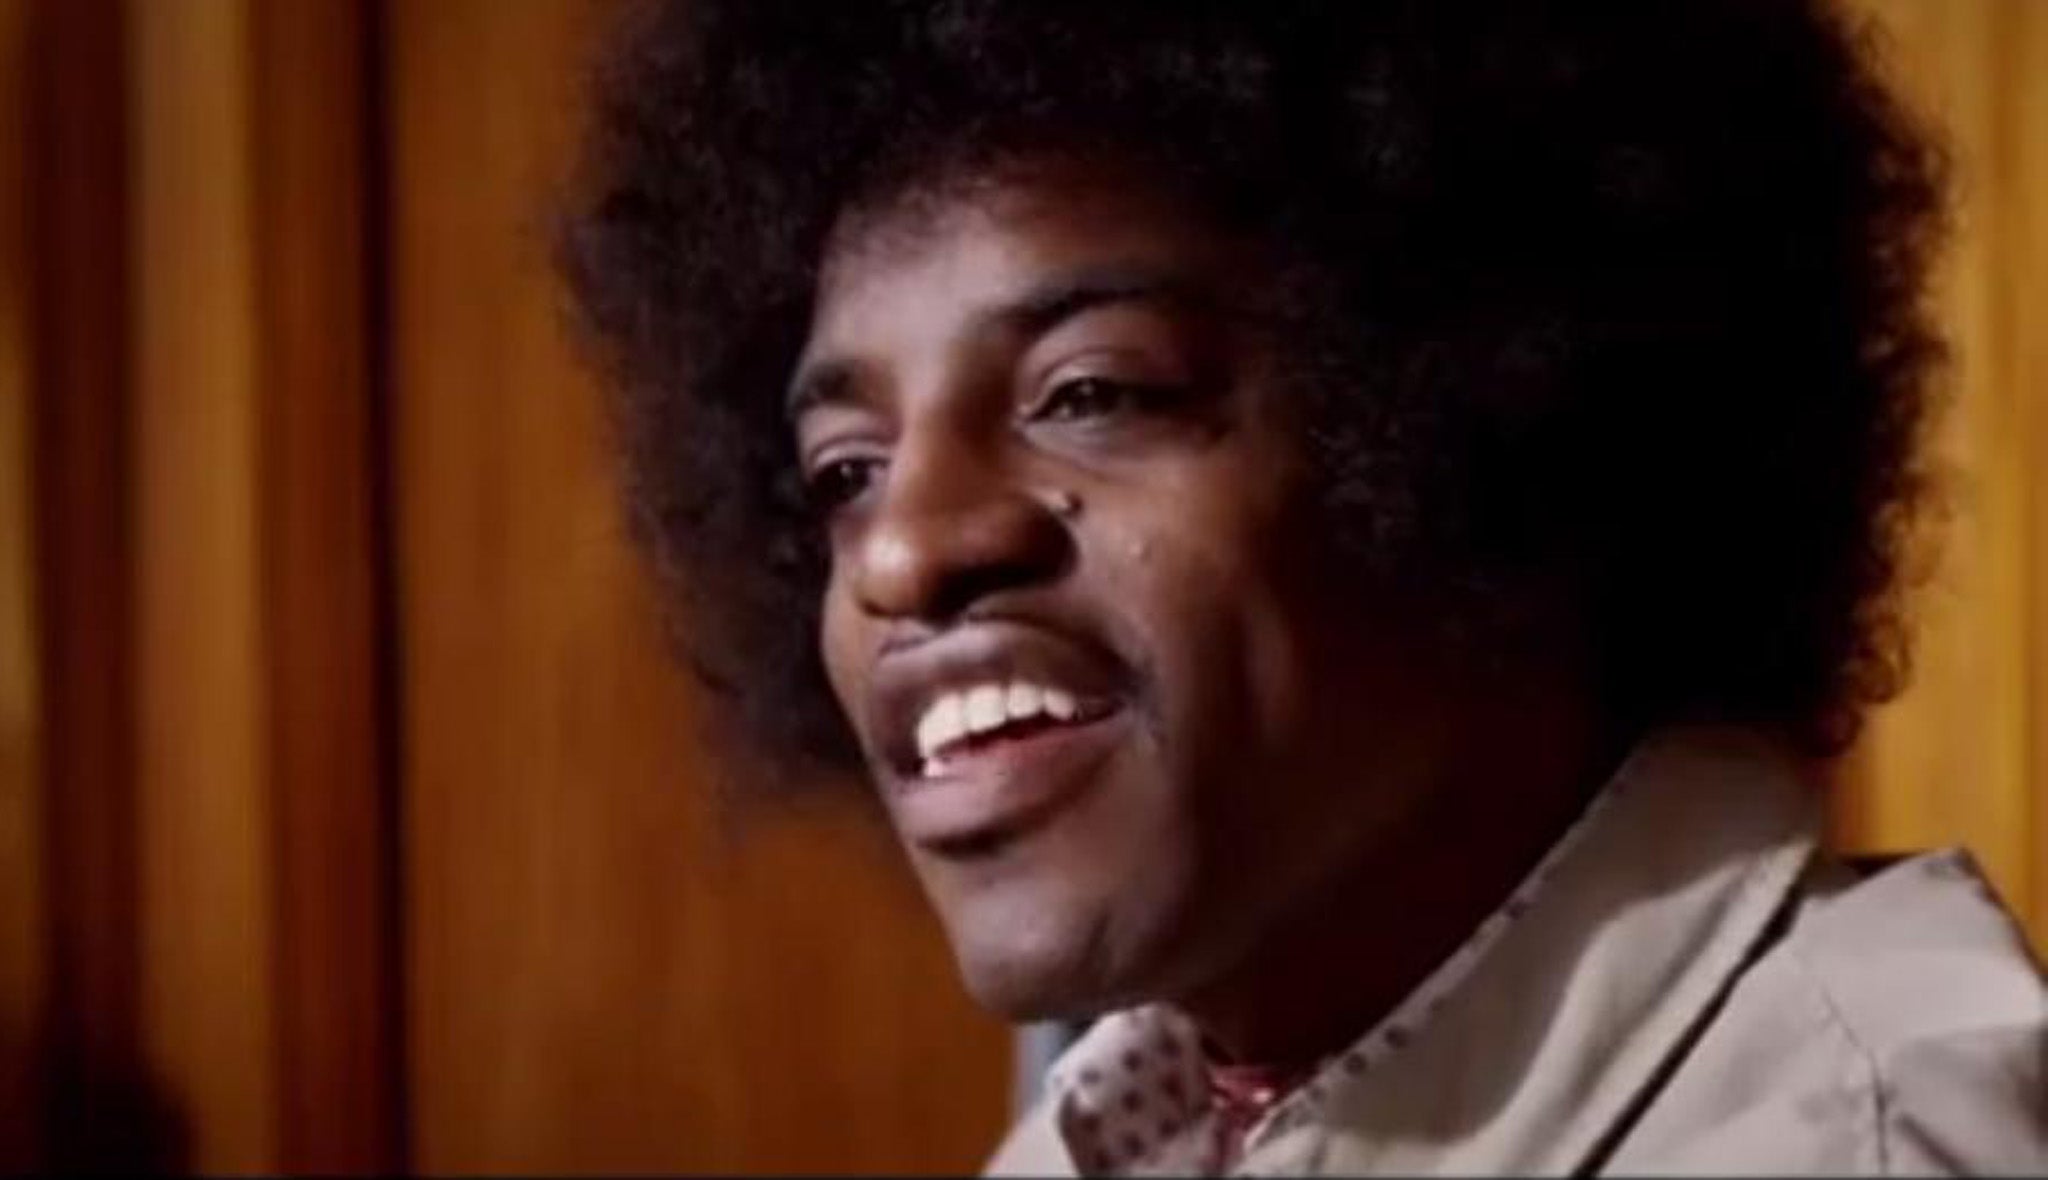 OutKast's Andre 3000 as Jimi Hendrix